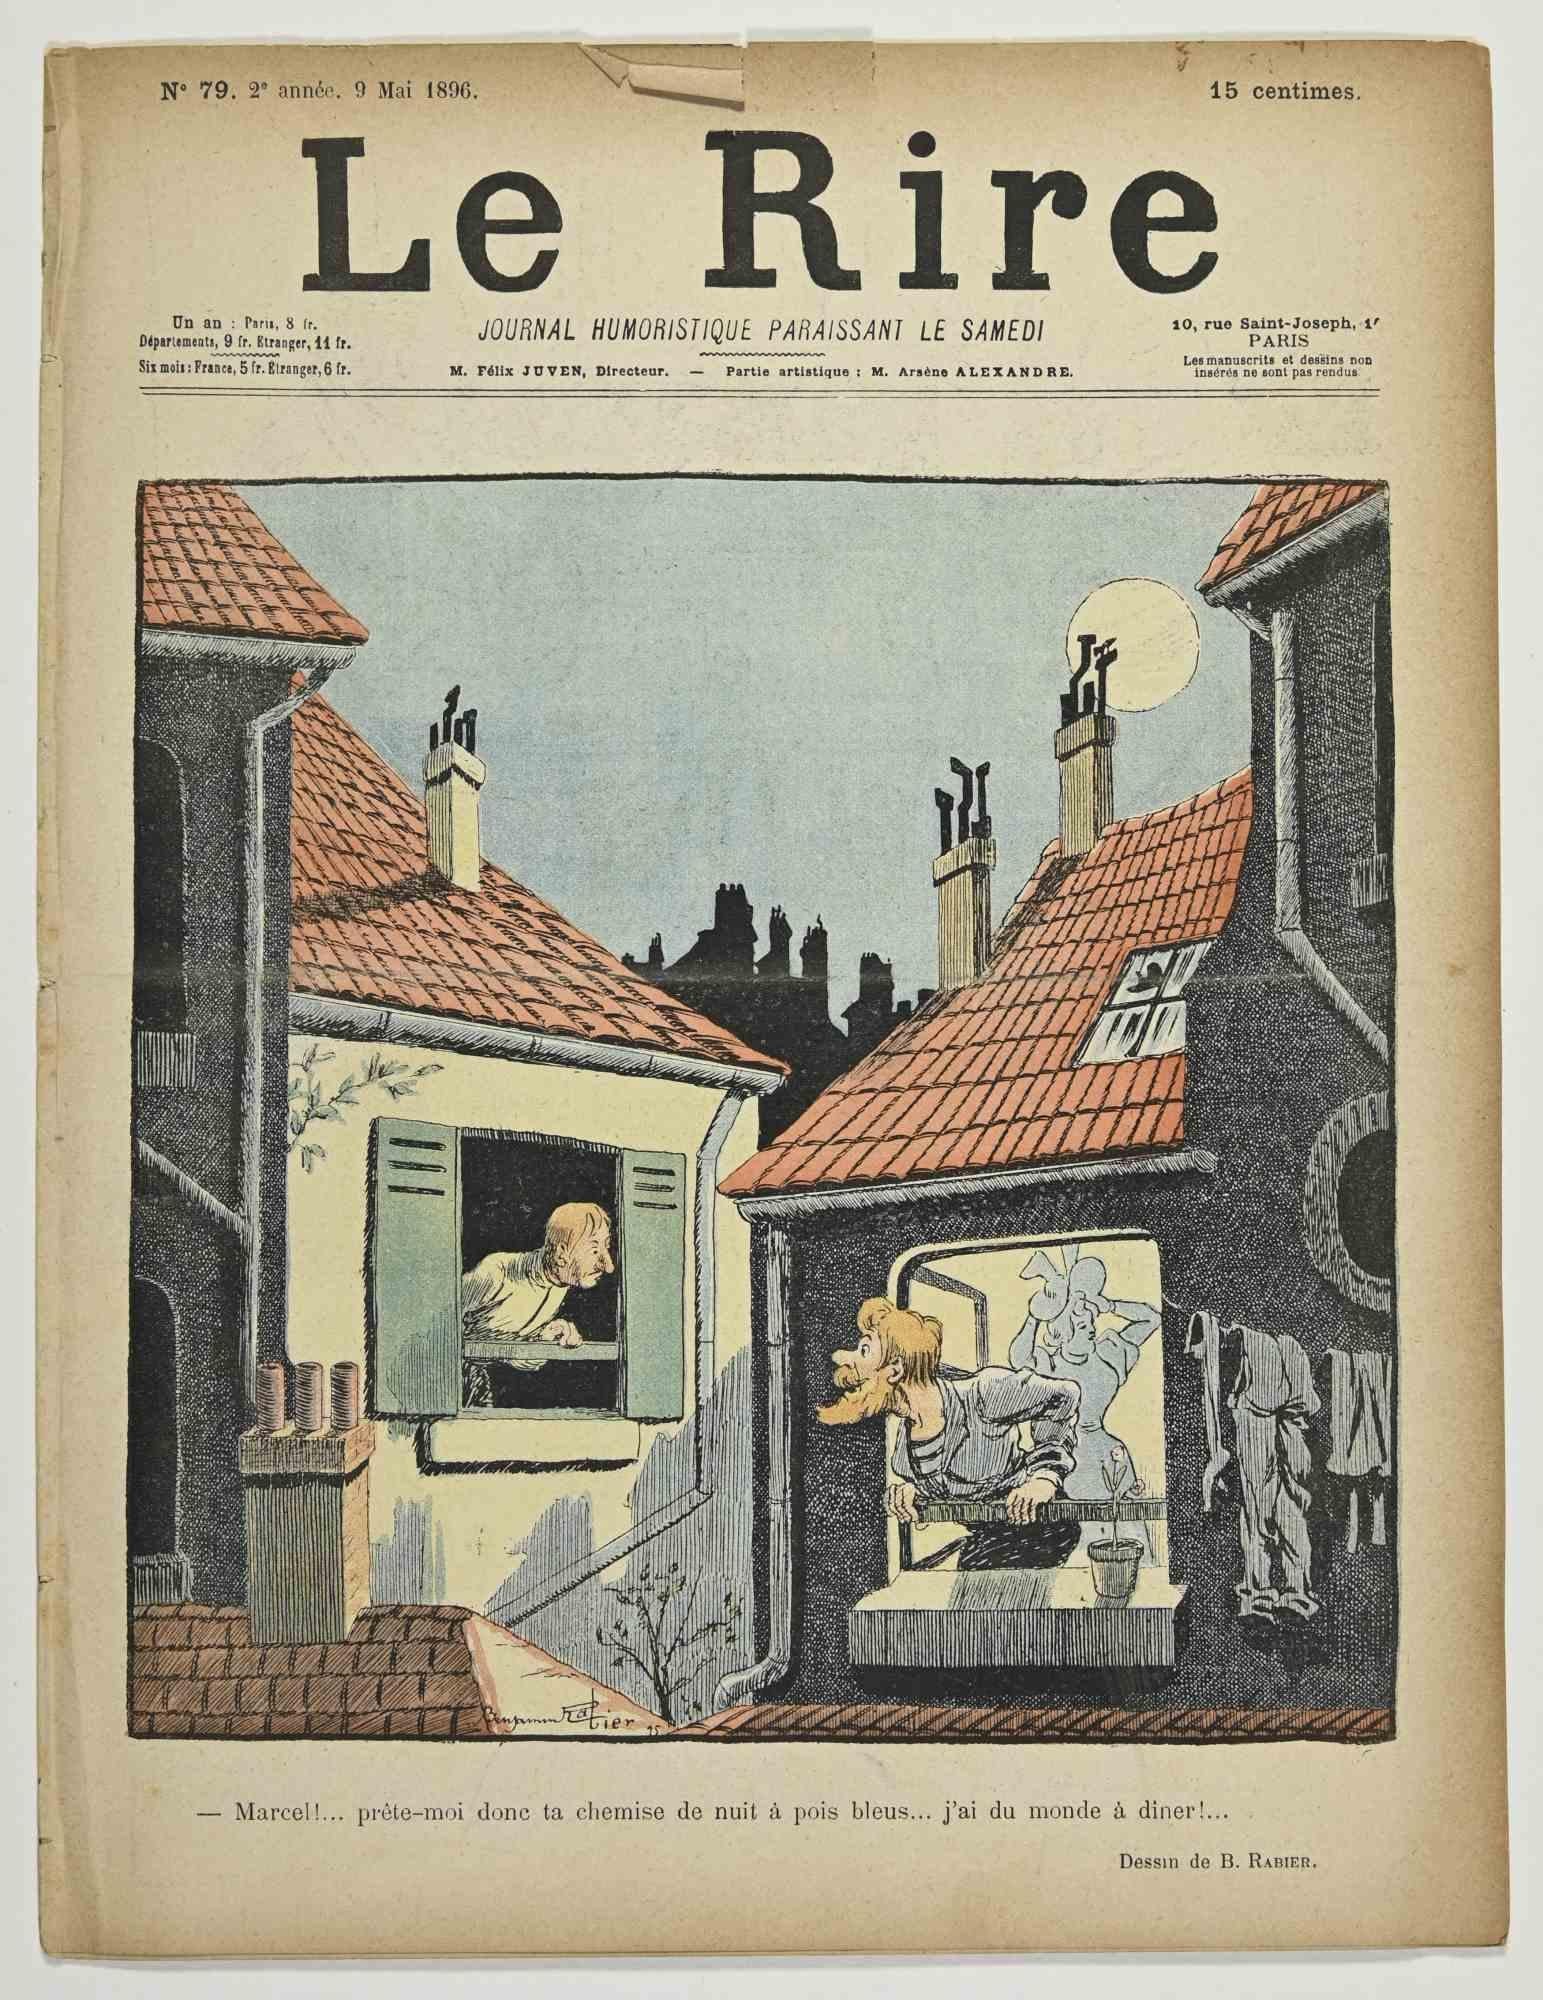 Le Rire - Illustrated Magazine after Charles Huard - 1896